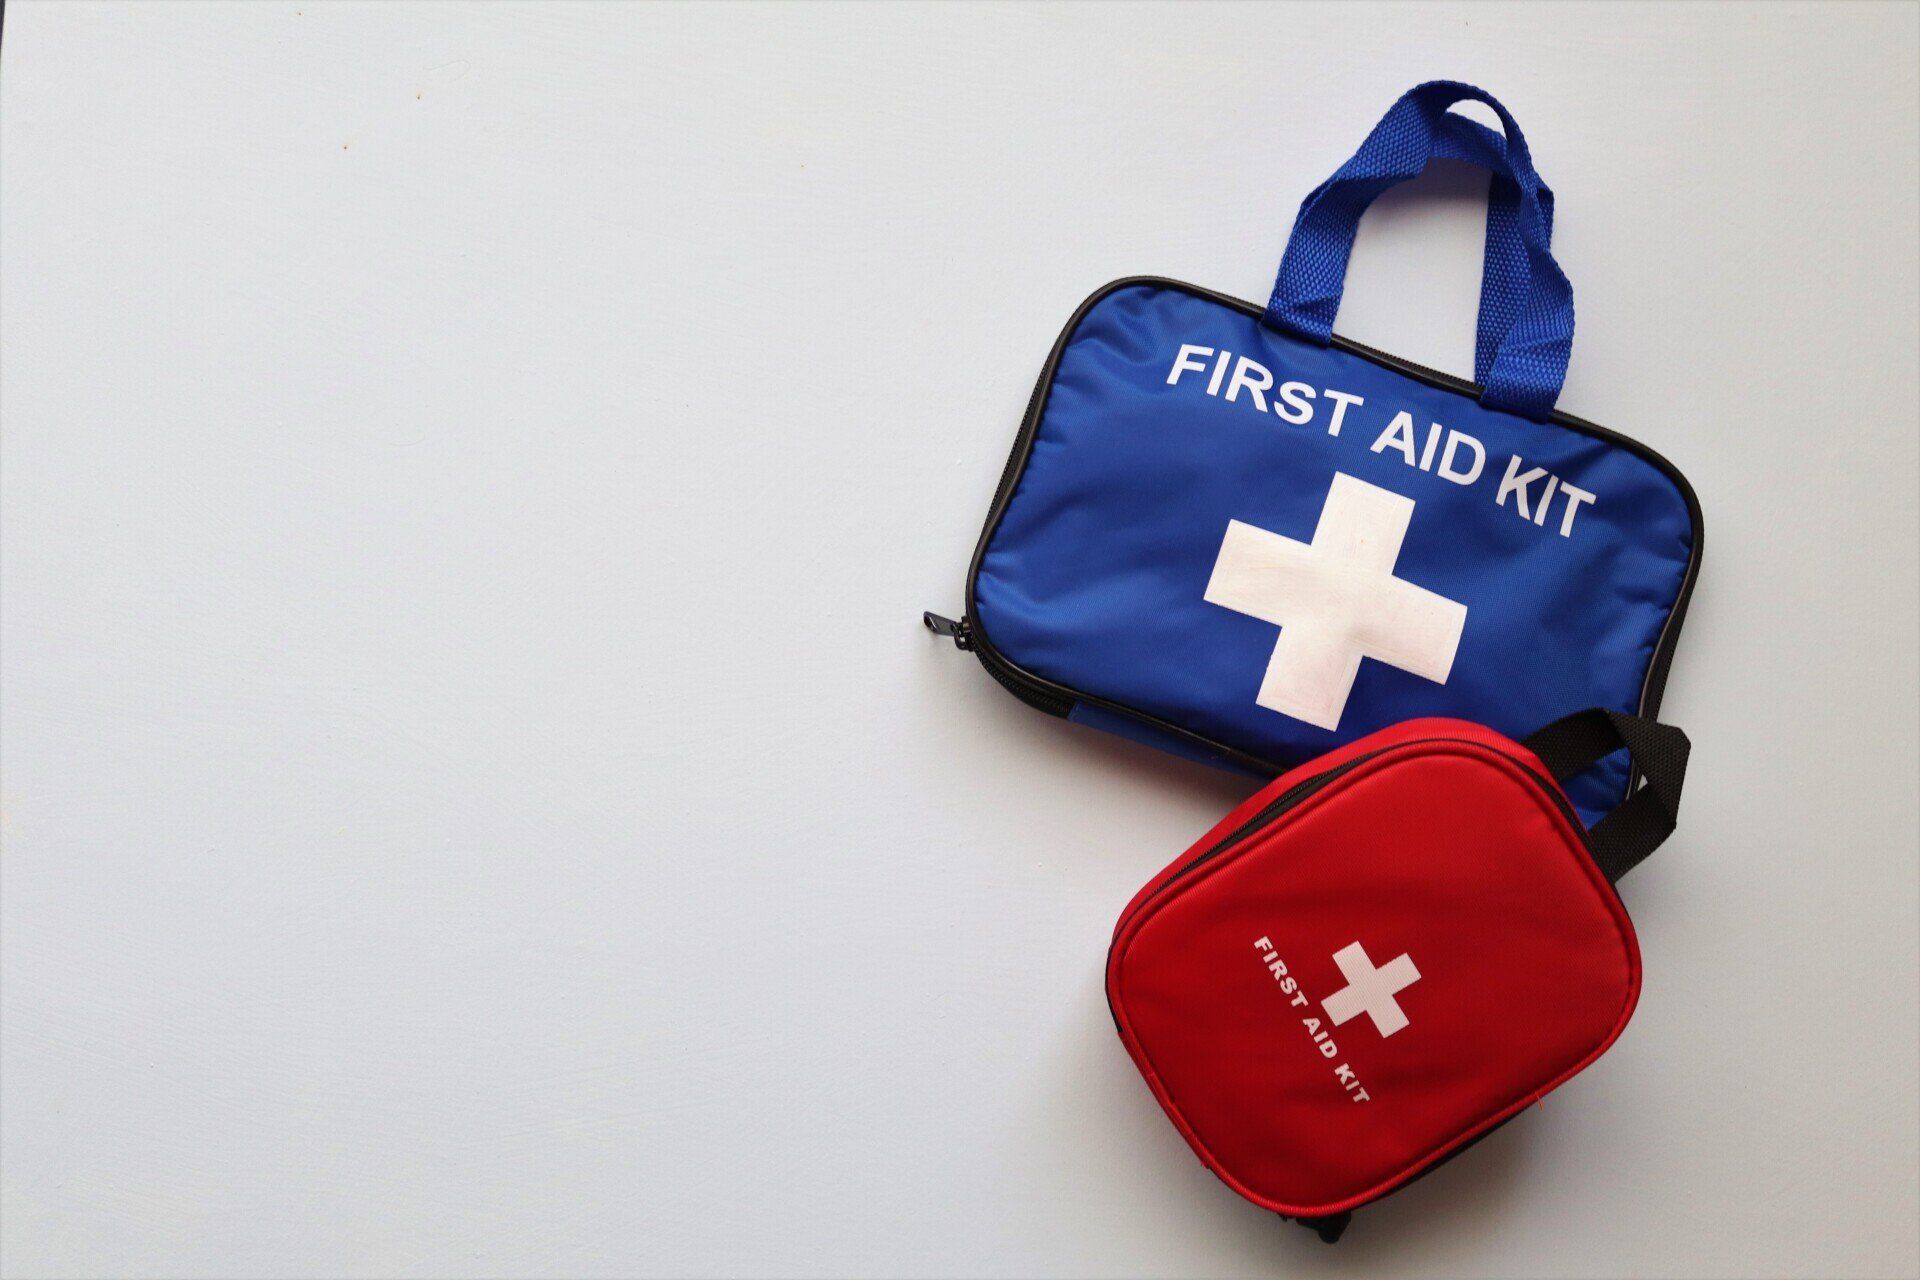 A blue first aid kit and a red first aid kit are on a white surface.